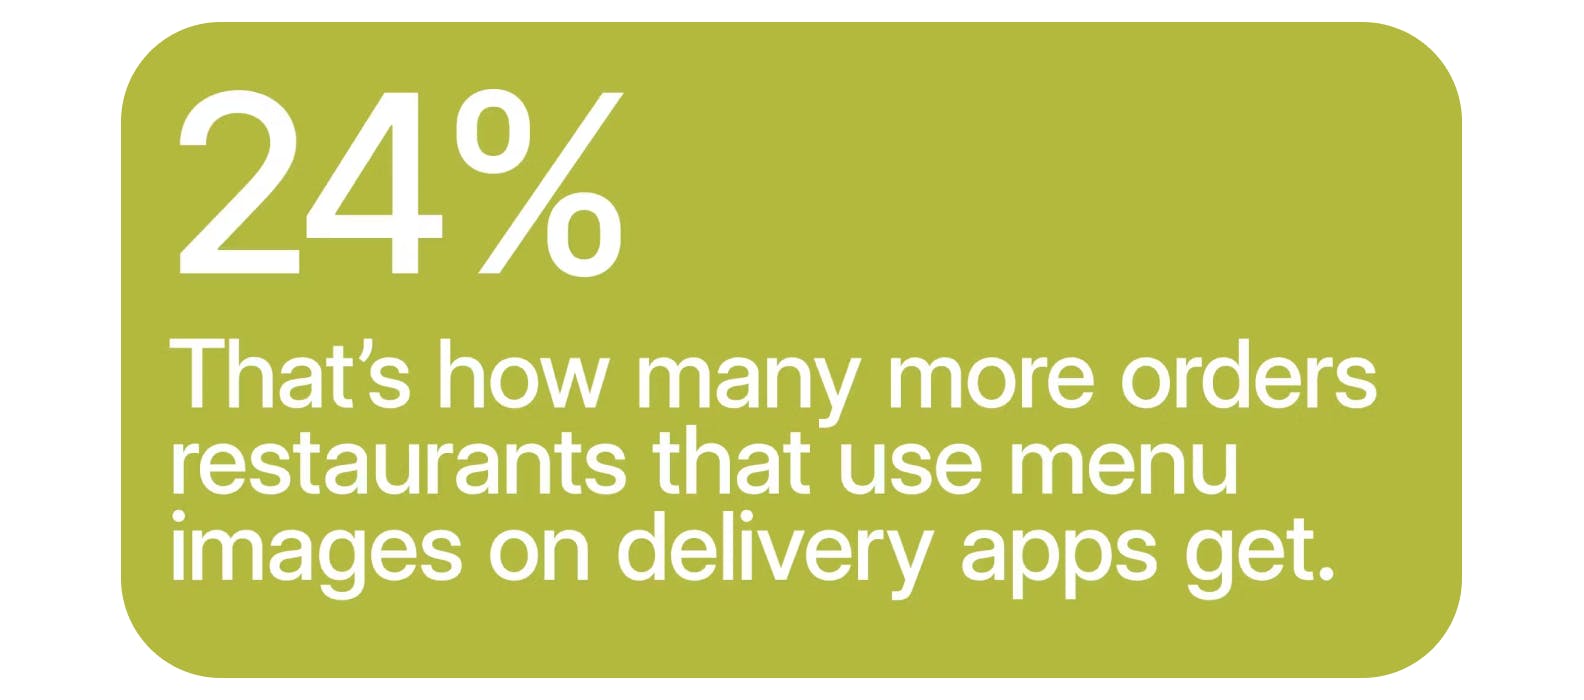 24%—That's how many more orders restaurant that use menu images on delivery apps get.